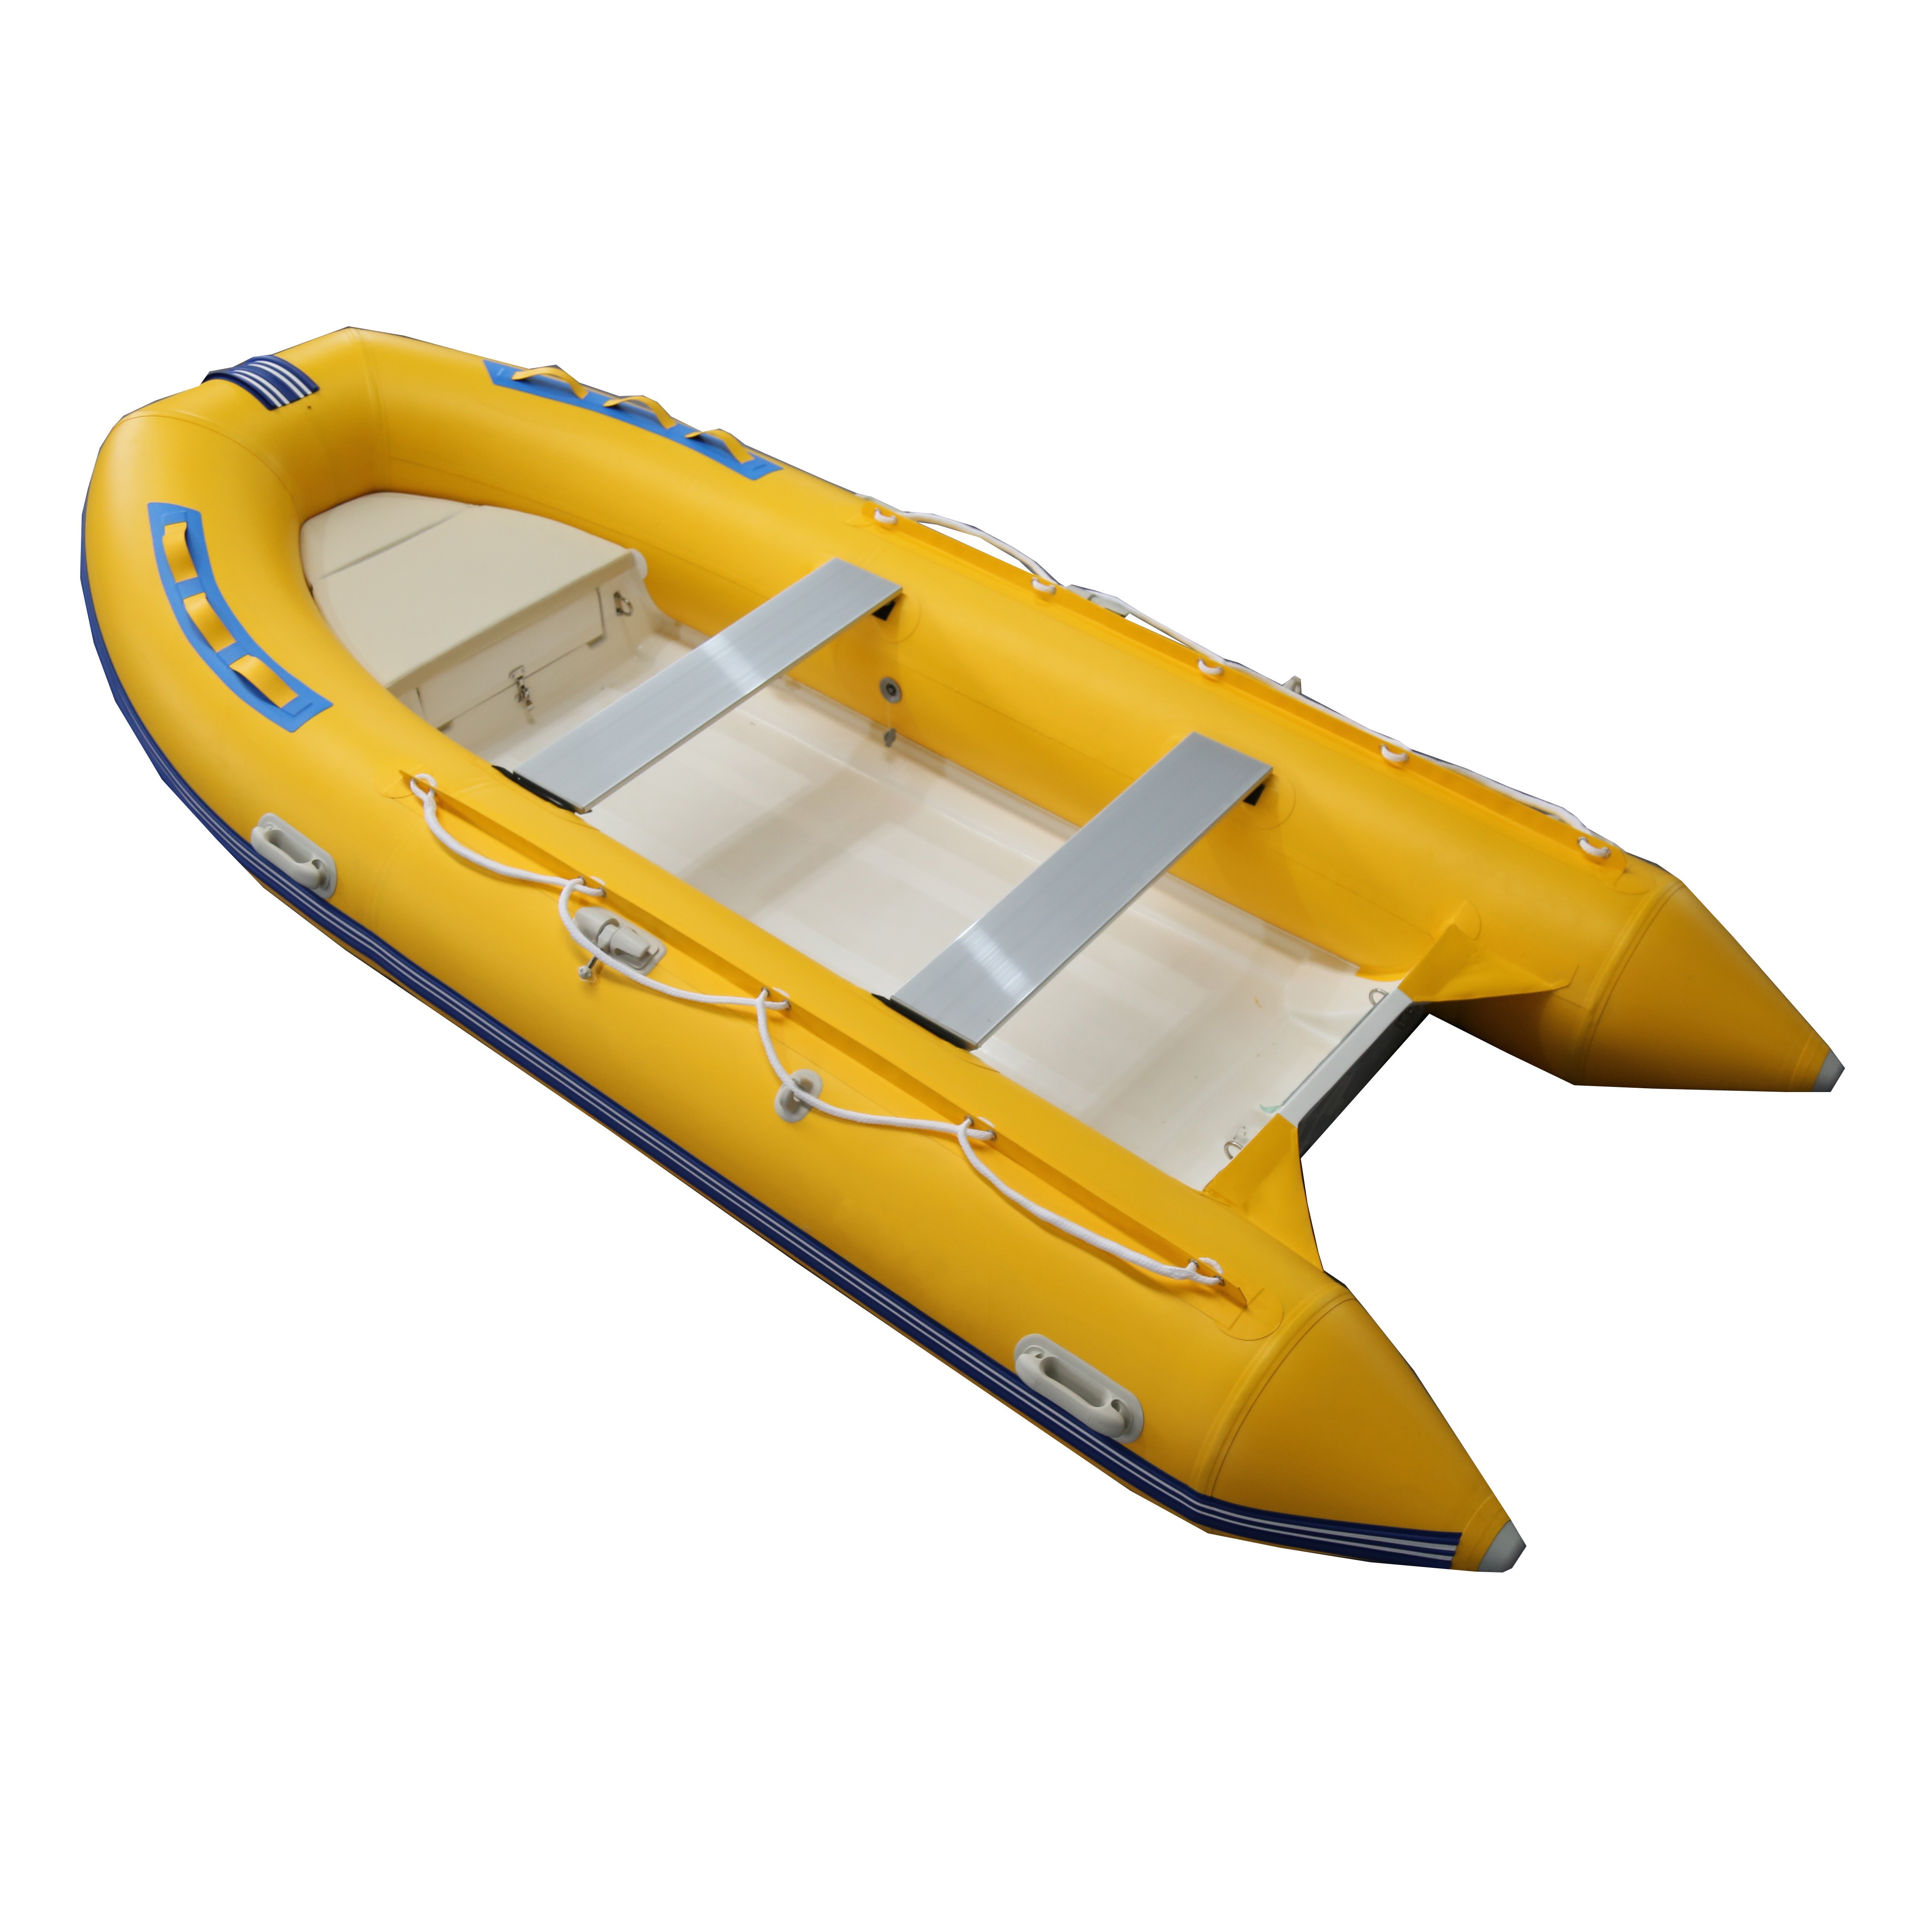 Achilles 10 inflatable boat